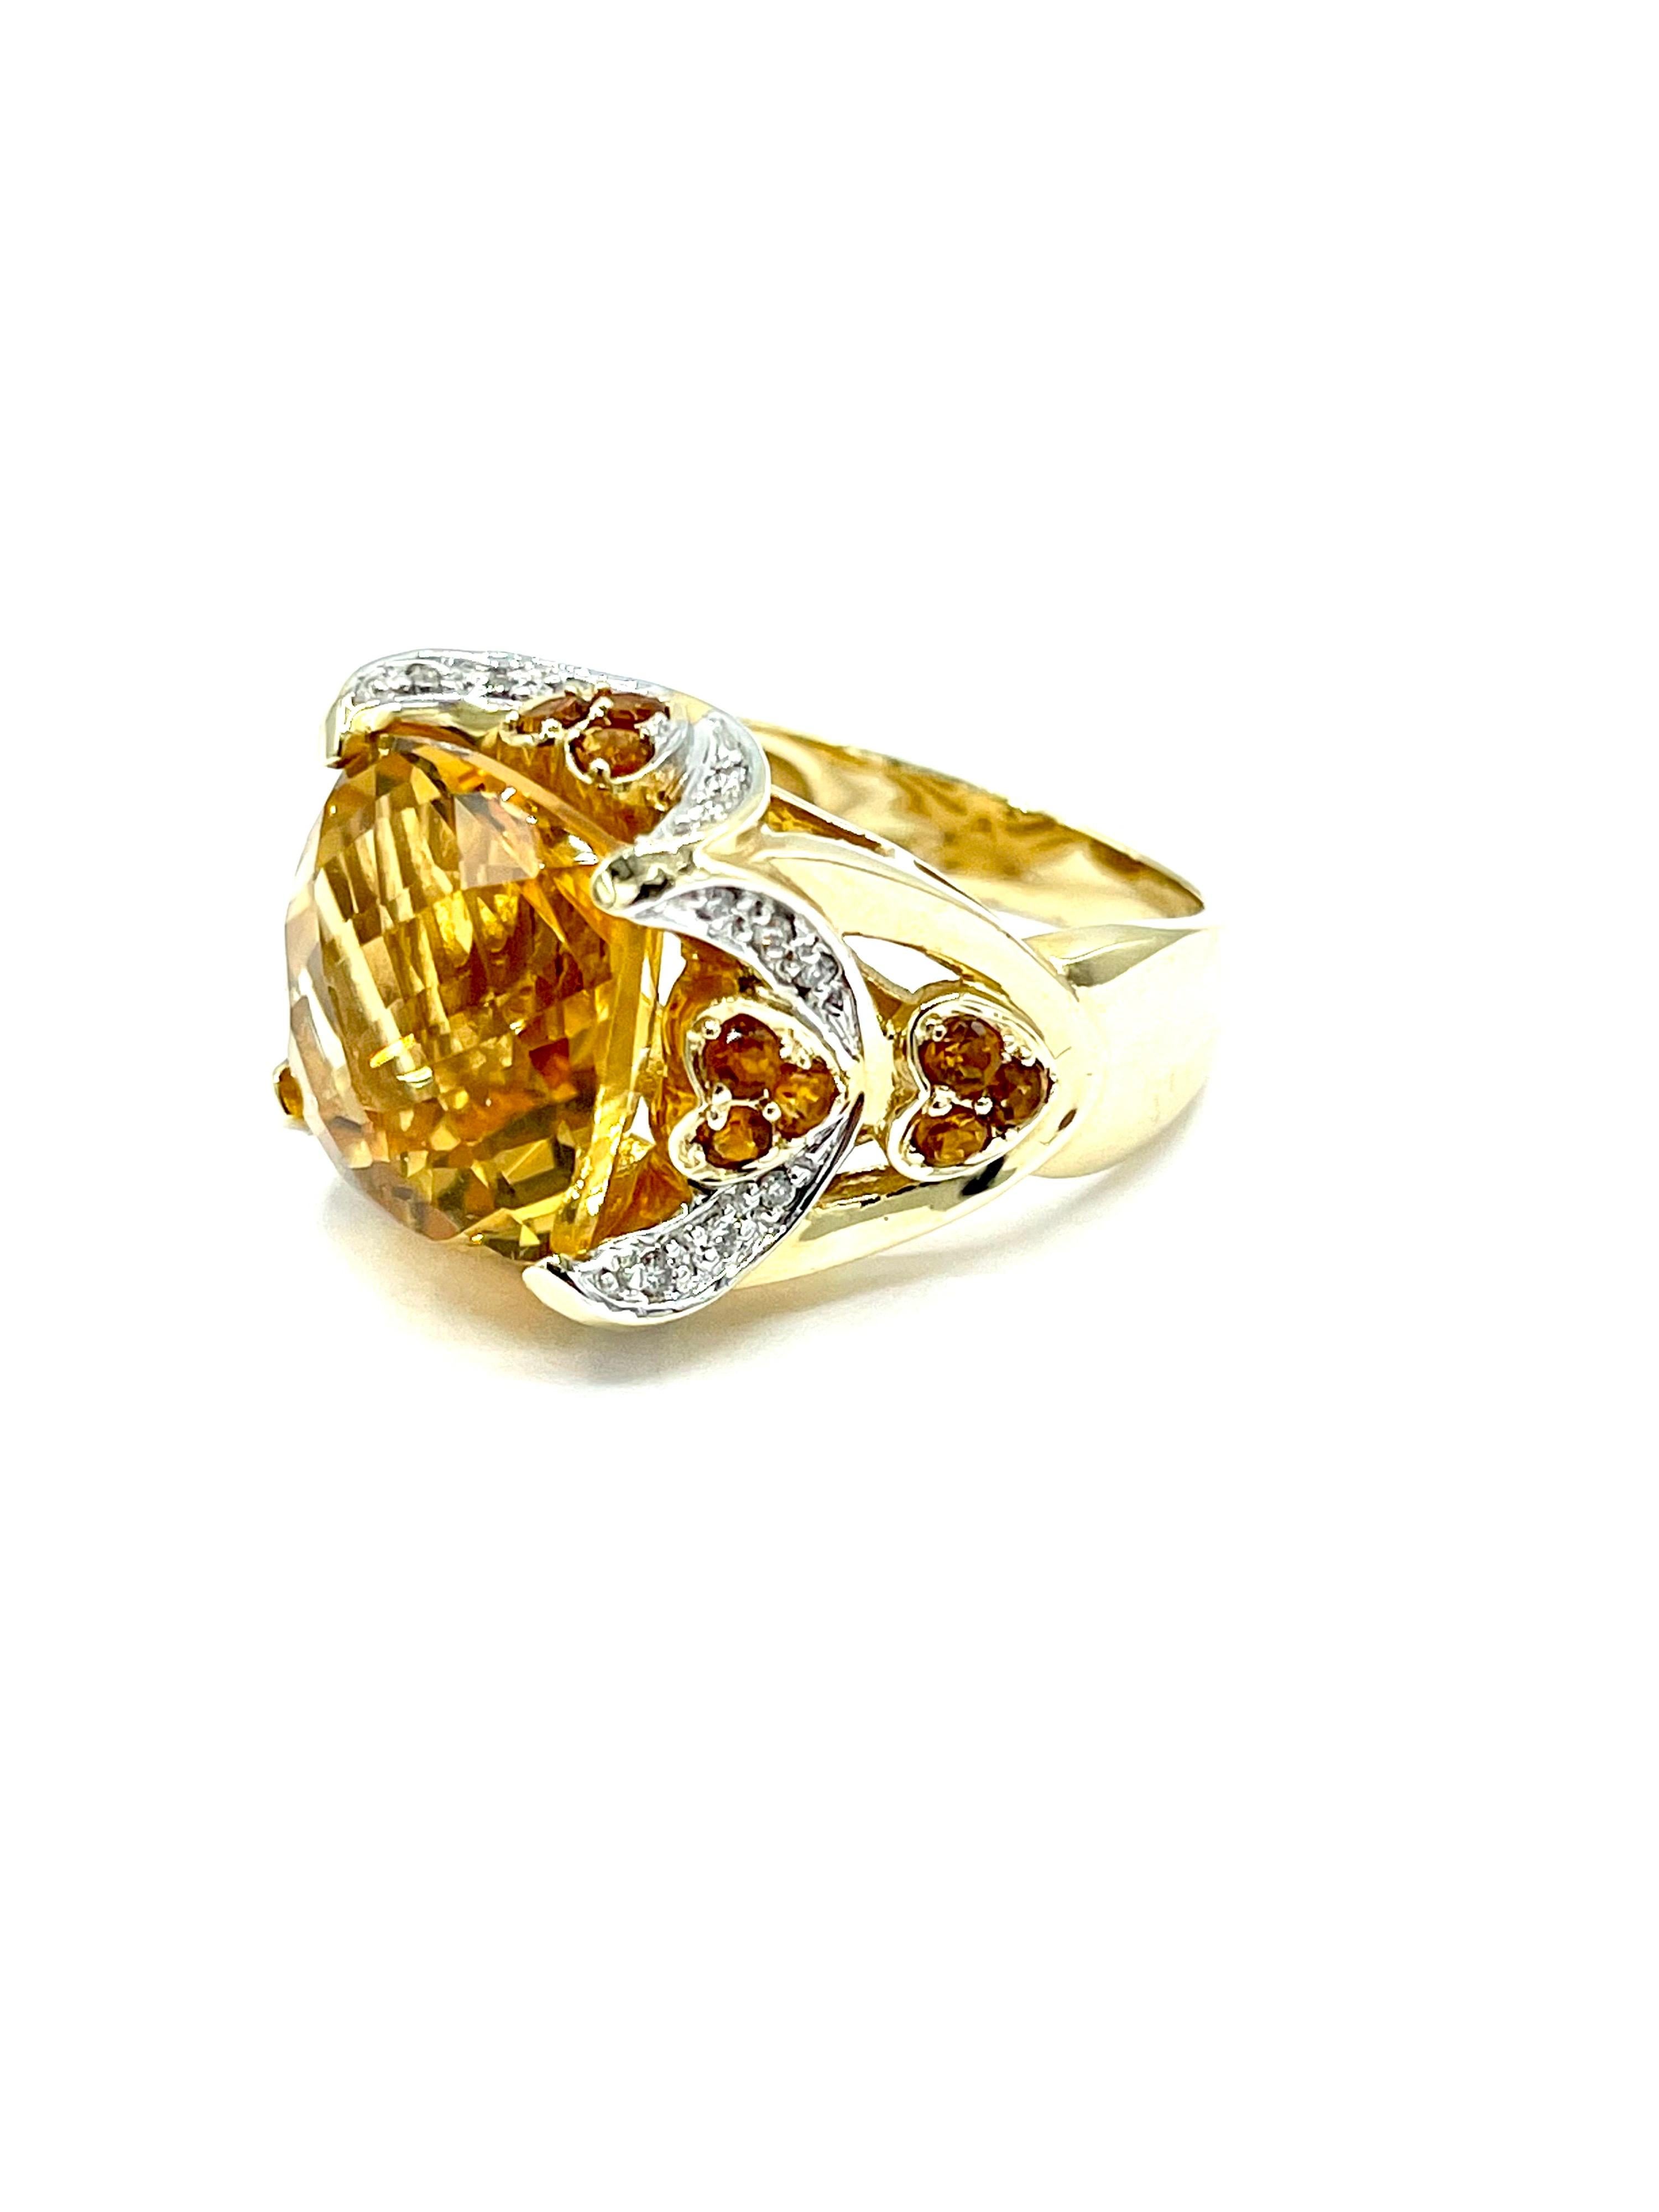 8.07 Carat Faceted Cushion Citrine and Diamond Yellow Gold Fashion Ring In Excellent Condition For Sale In Chevy Chase, MD